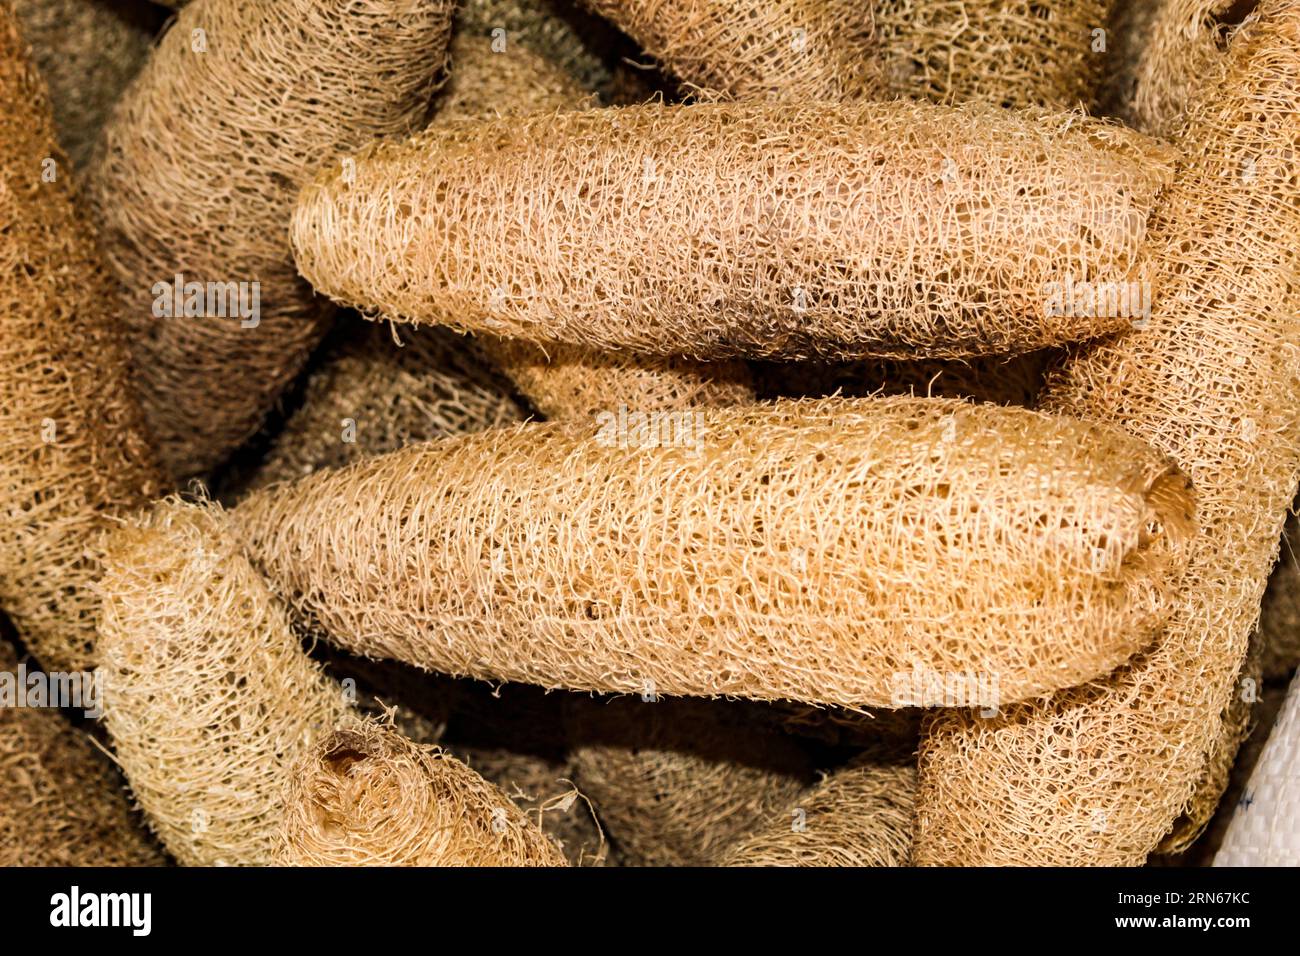 Vegetable sponges or vegetable loofah, used as a bath exfoliant, made from the fruit of Luffa aegyptiaca; Luffa cylllindrica, Stock Photo